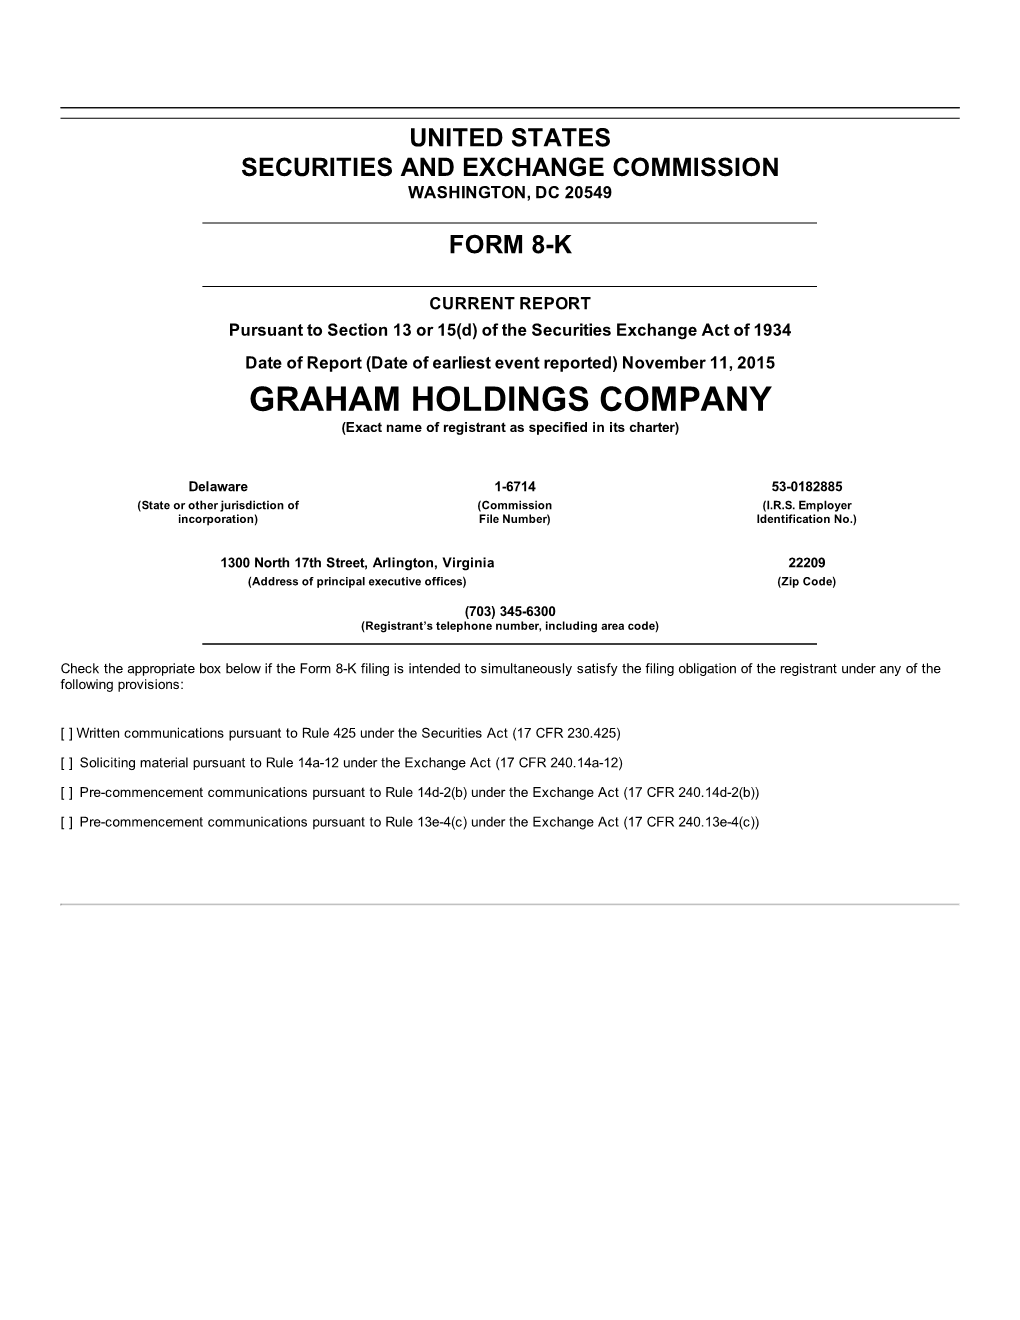 GRAHAM HOLDINGS COMPANY (Exact Name of Registrant As Specified in Its Charter)